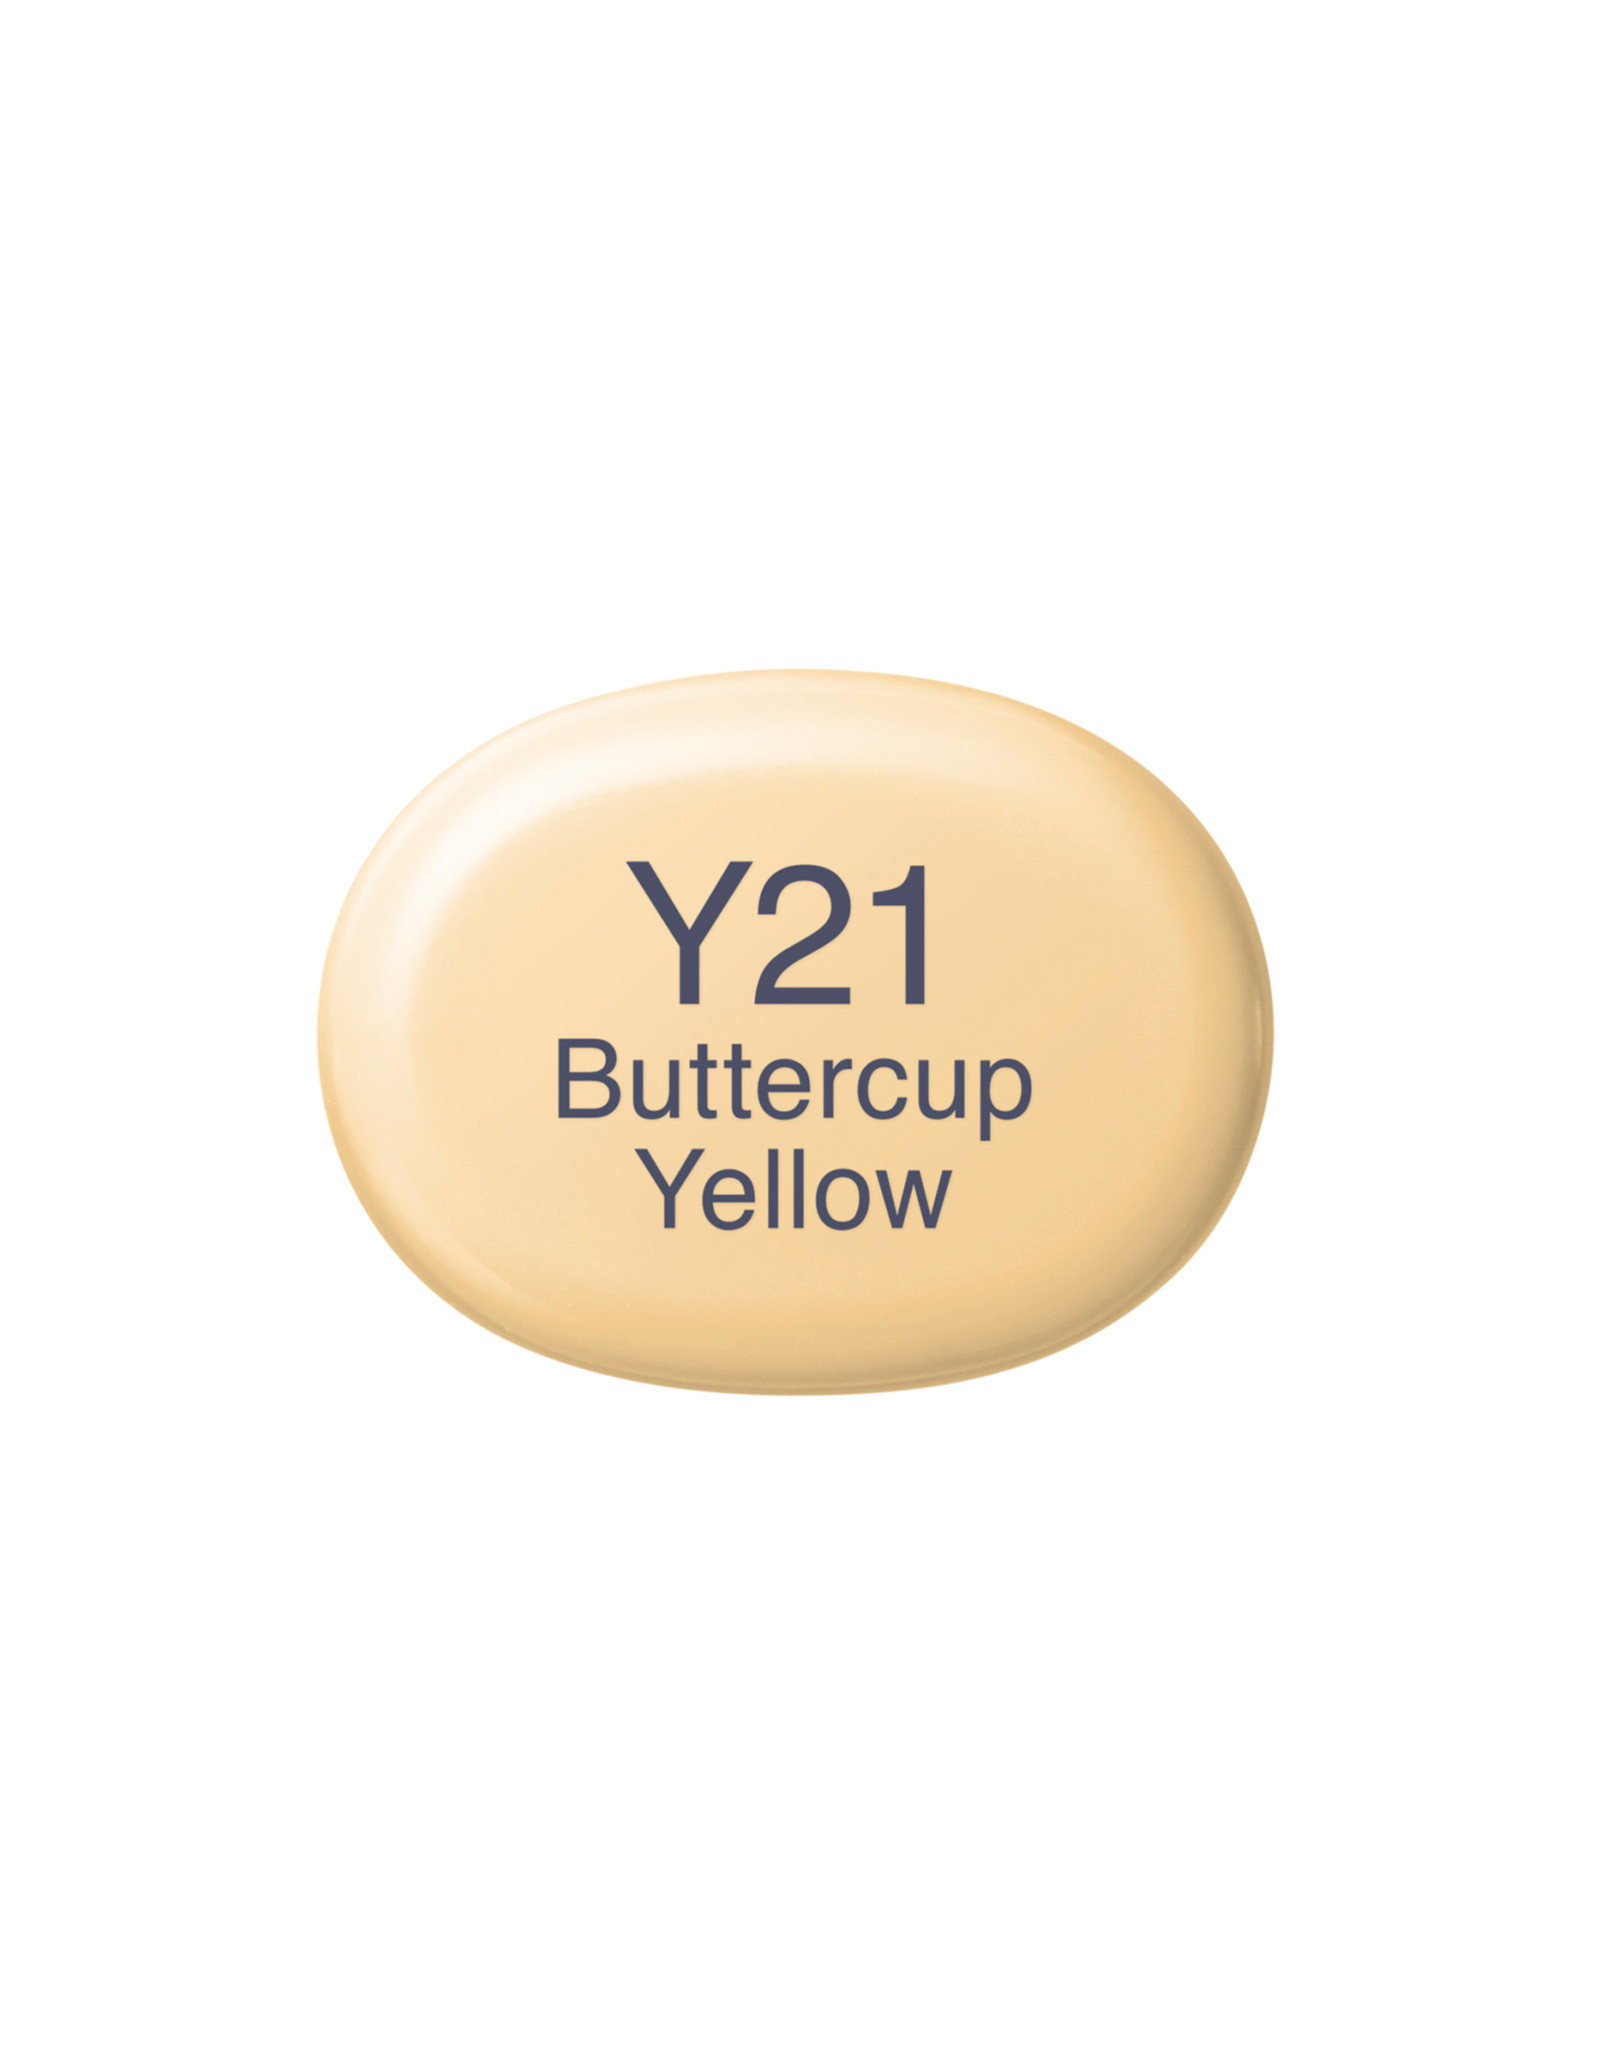 COPIC COPIC Sketch Marker Y21 Buttercup Yellow